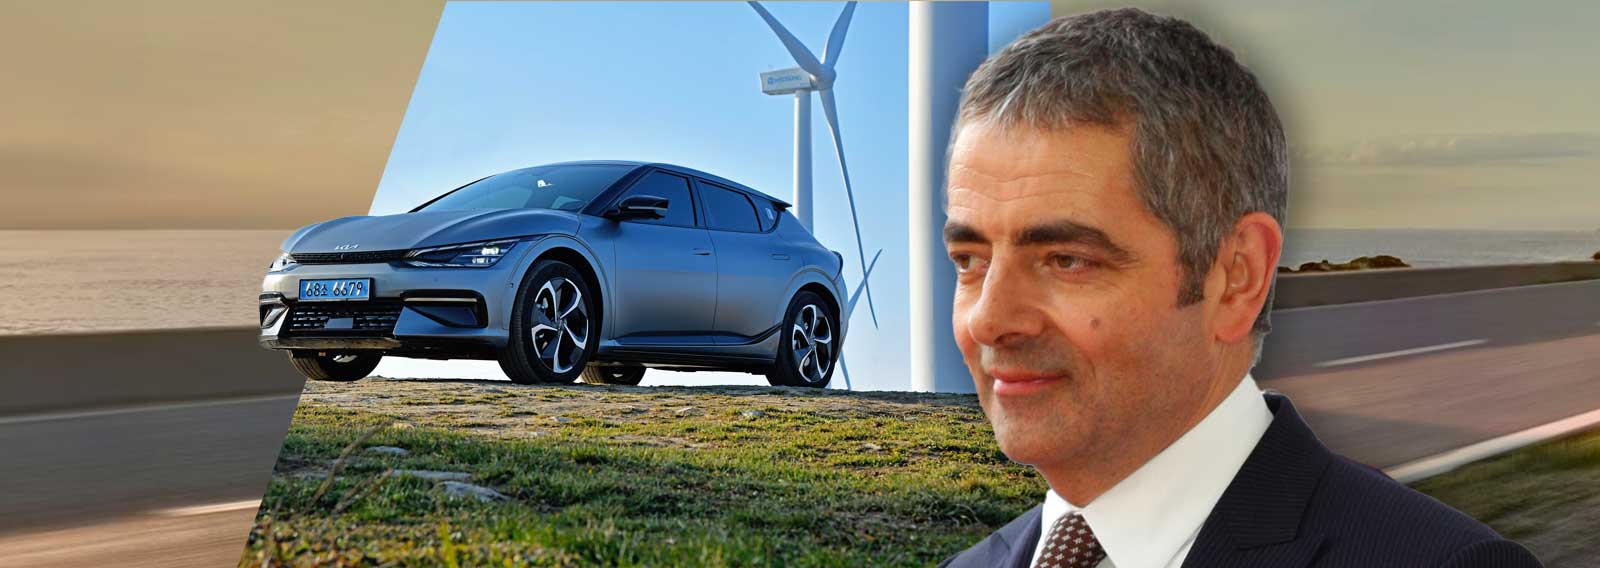 Activists Accuse Rowan Atkinson of Fuelling the Climate “Crisis” After Criticising EVs